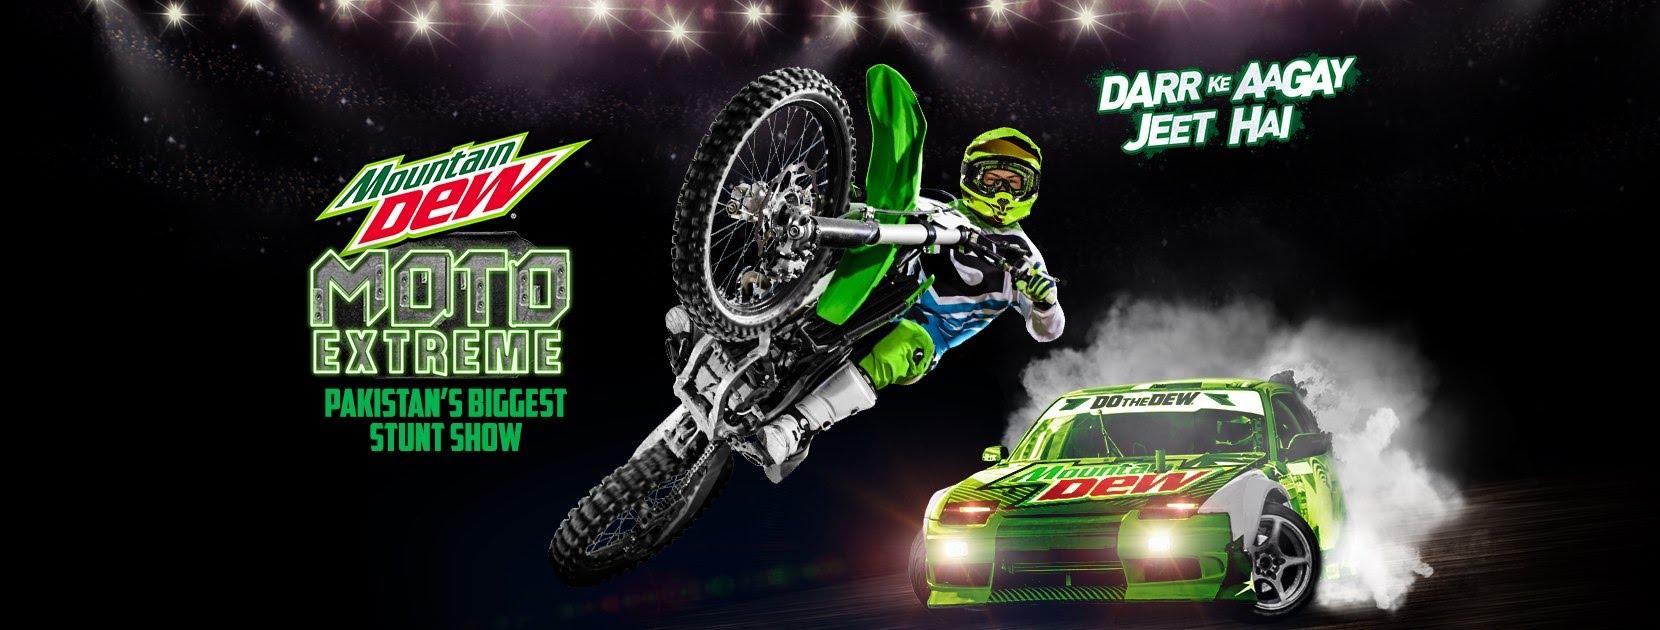 cover photo with sports car, stuntman on bike, and Mountain Dew Event logo